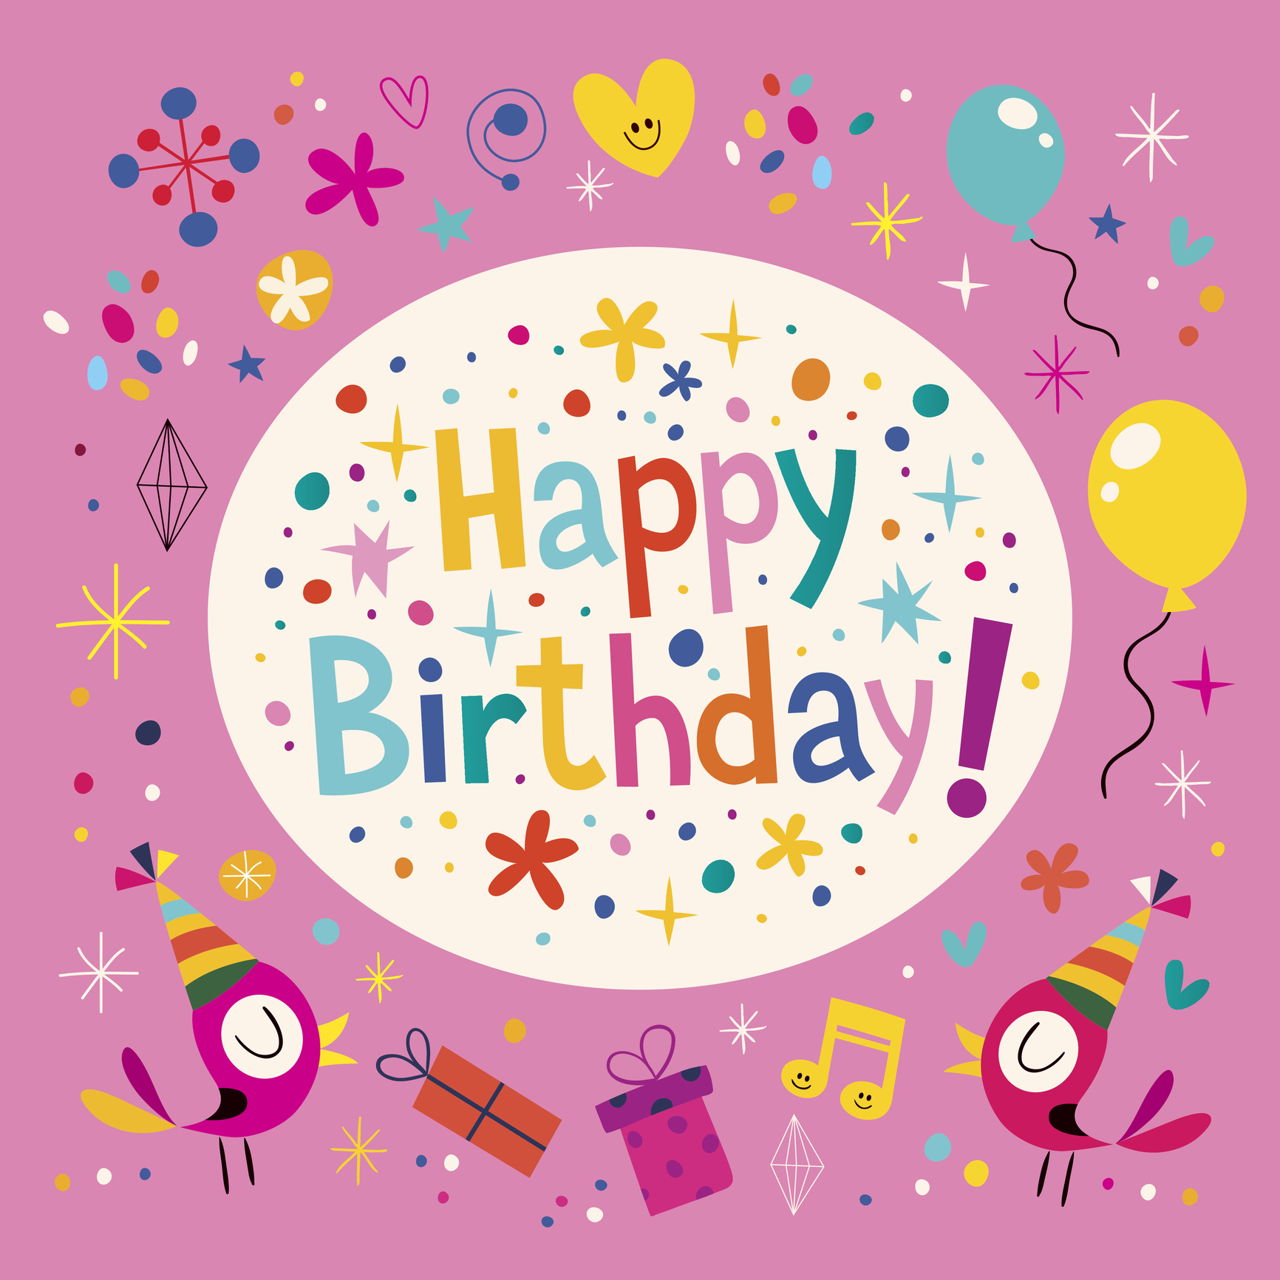 An Amazing Collection of Birthday Wishes And Quotes - Birthday Frenzy